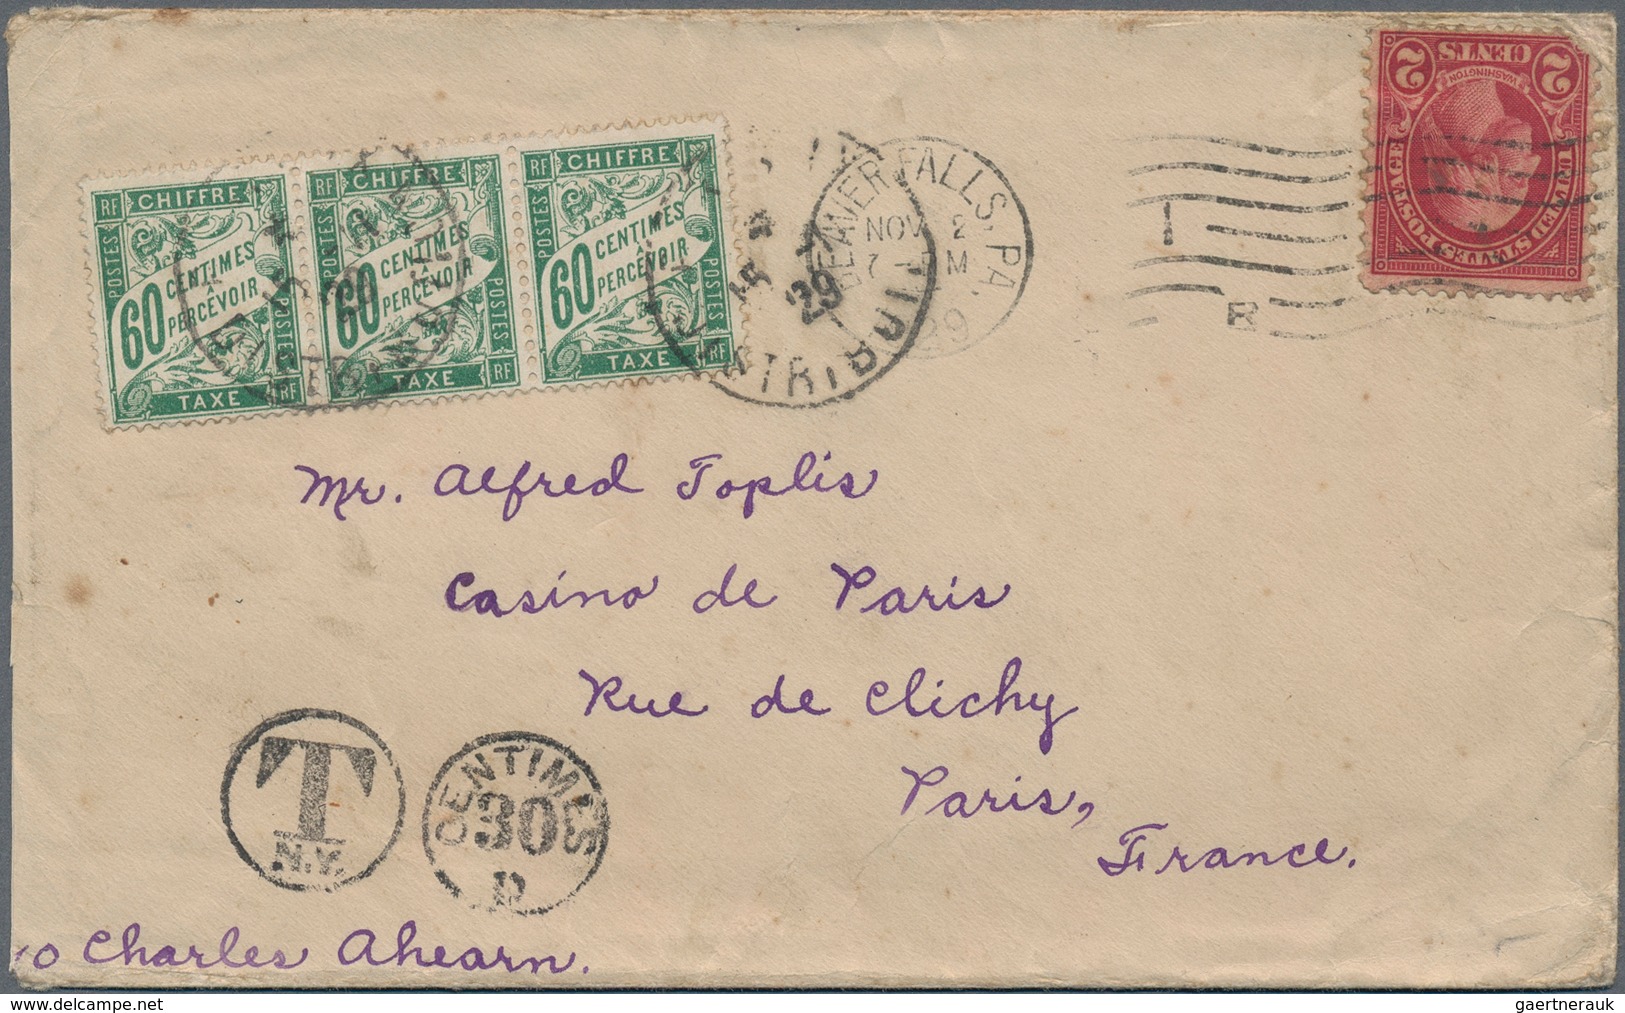 Frankreich - Portomarken: 1862/1987 (ca.), lot of more than 100 covers/cards with postage dues, dome